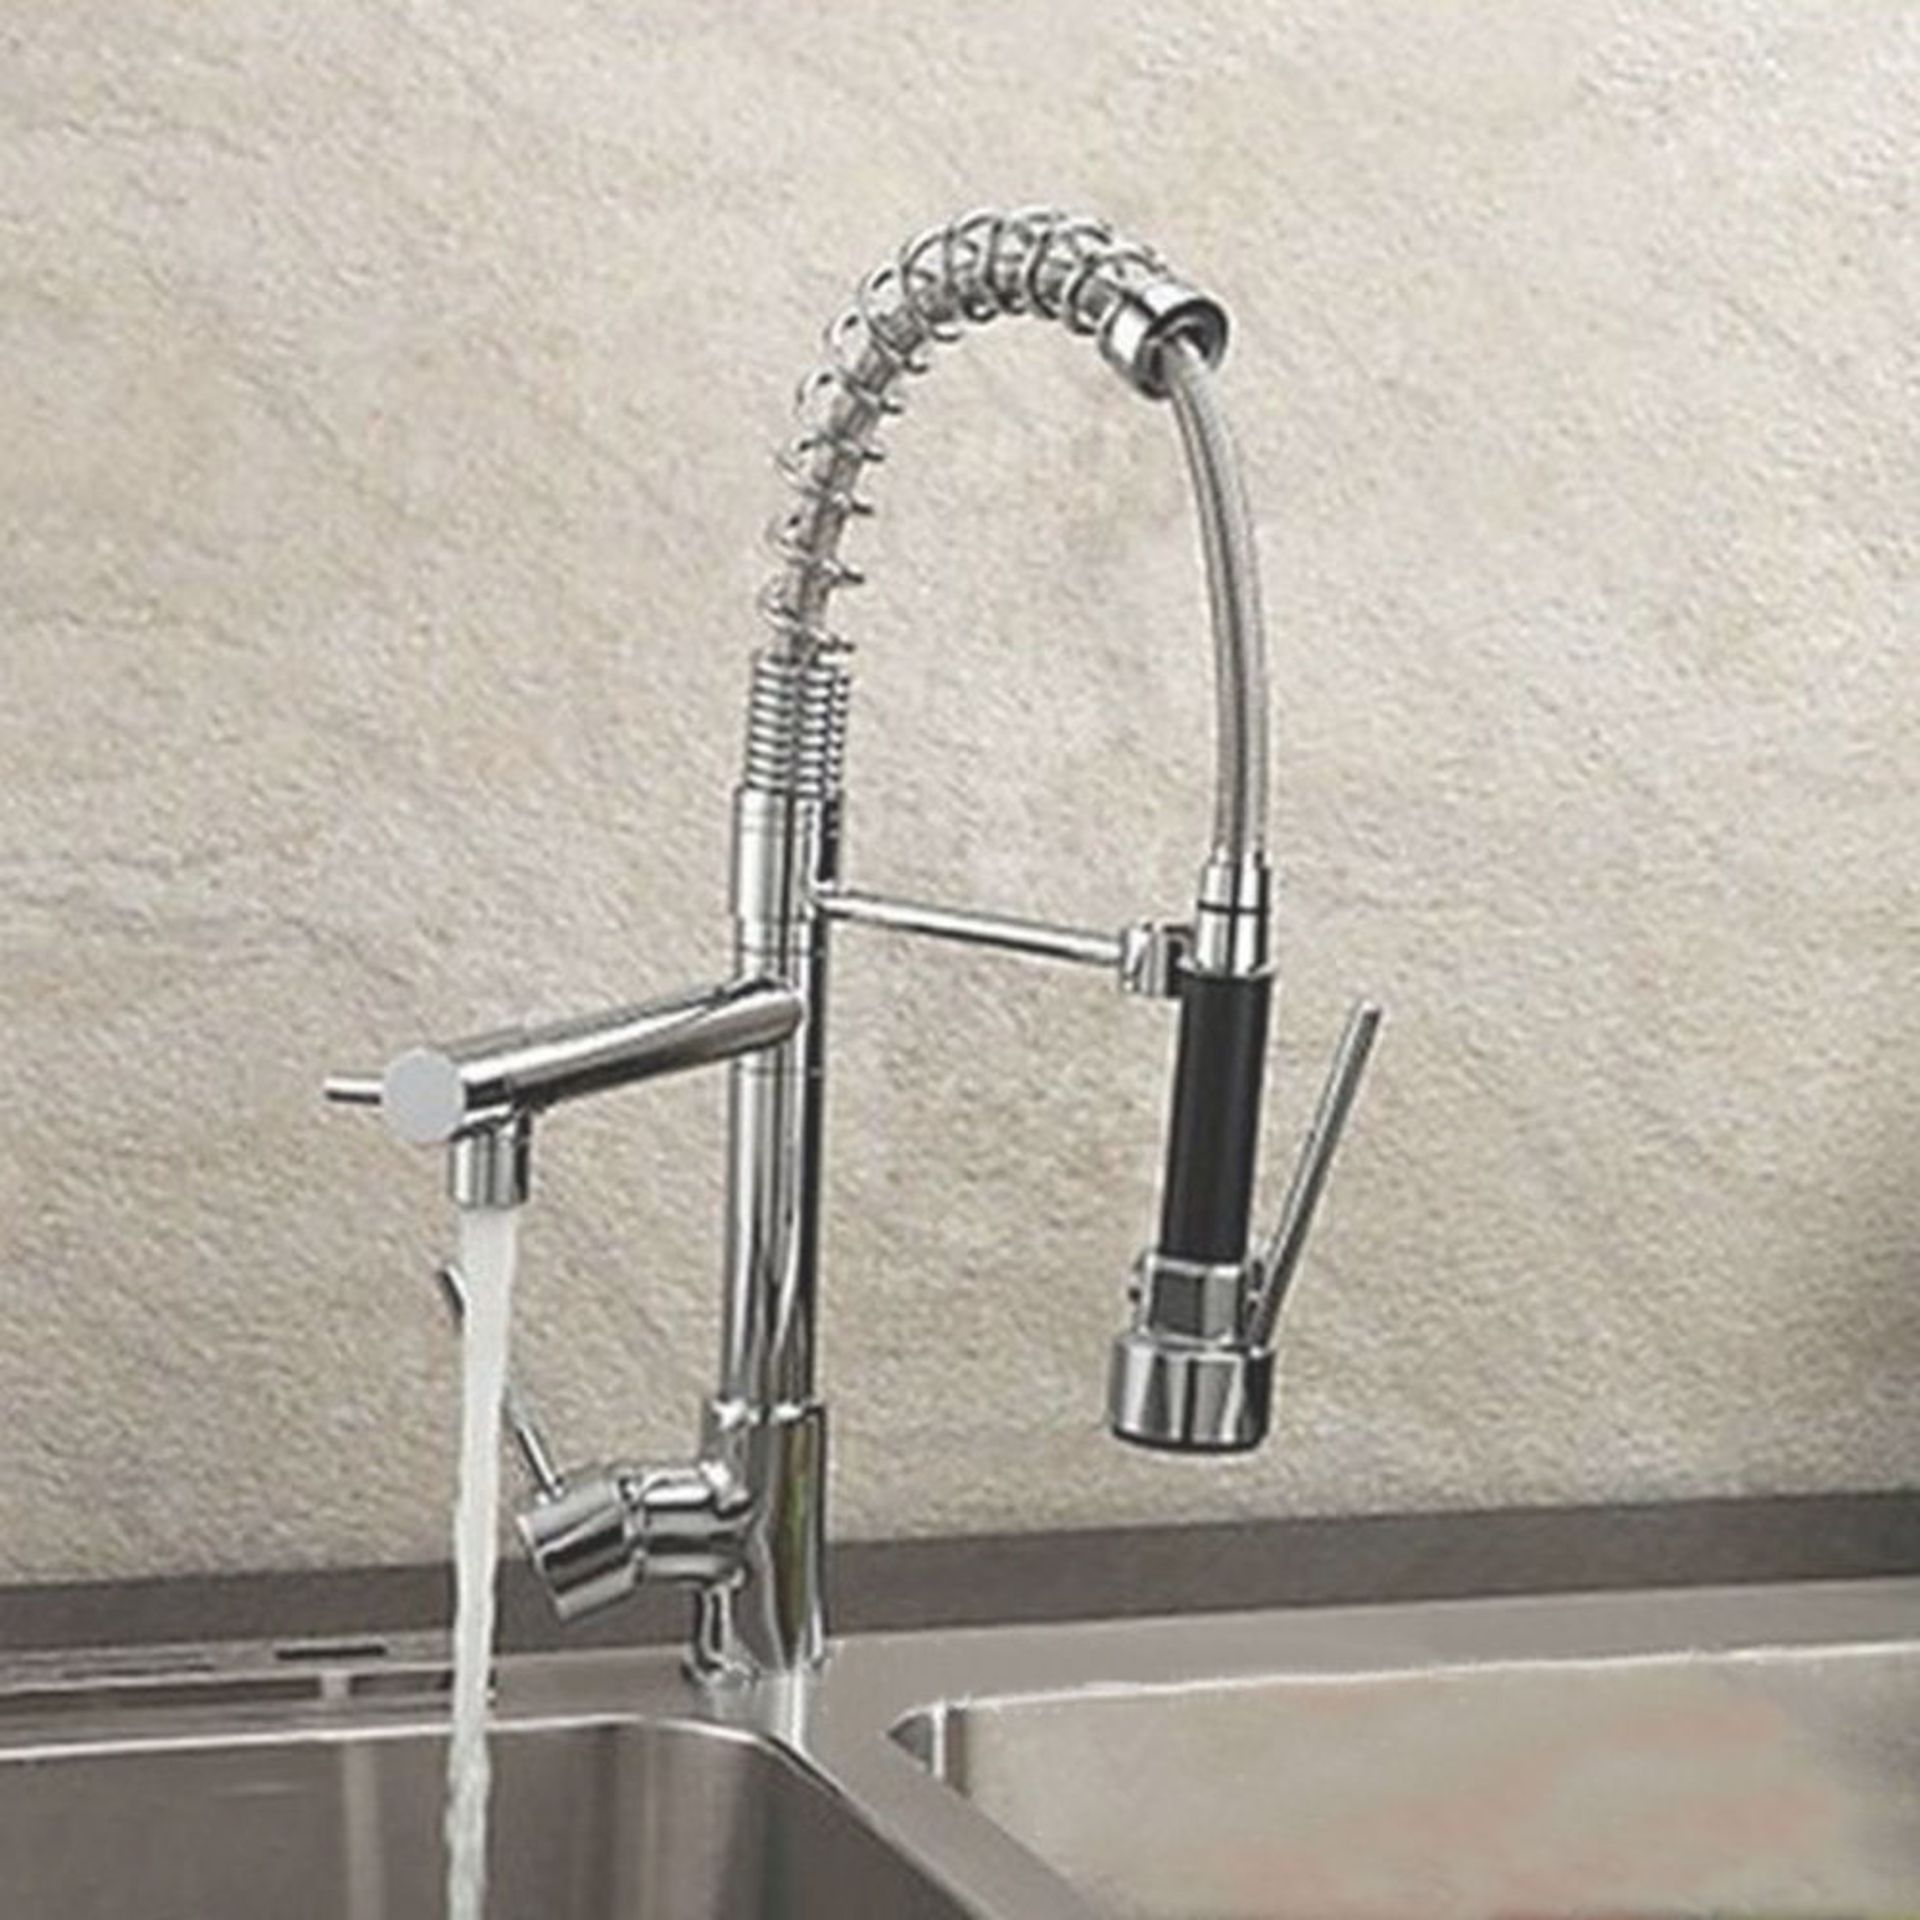 (P269) Bentley Modern Monobloc Chrome Brass Pull Out Spray Mixer Tap. RRP £349.99. This tap is